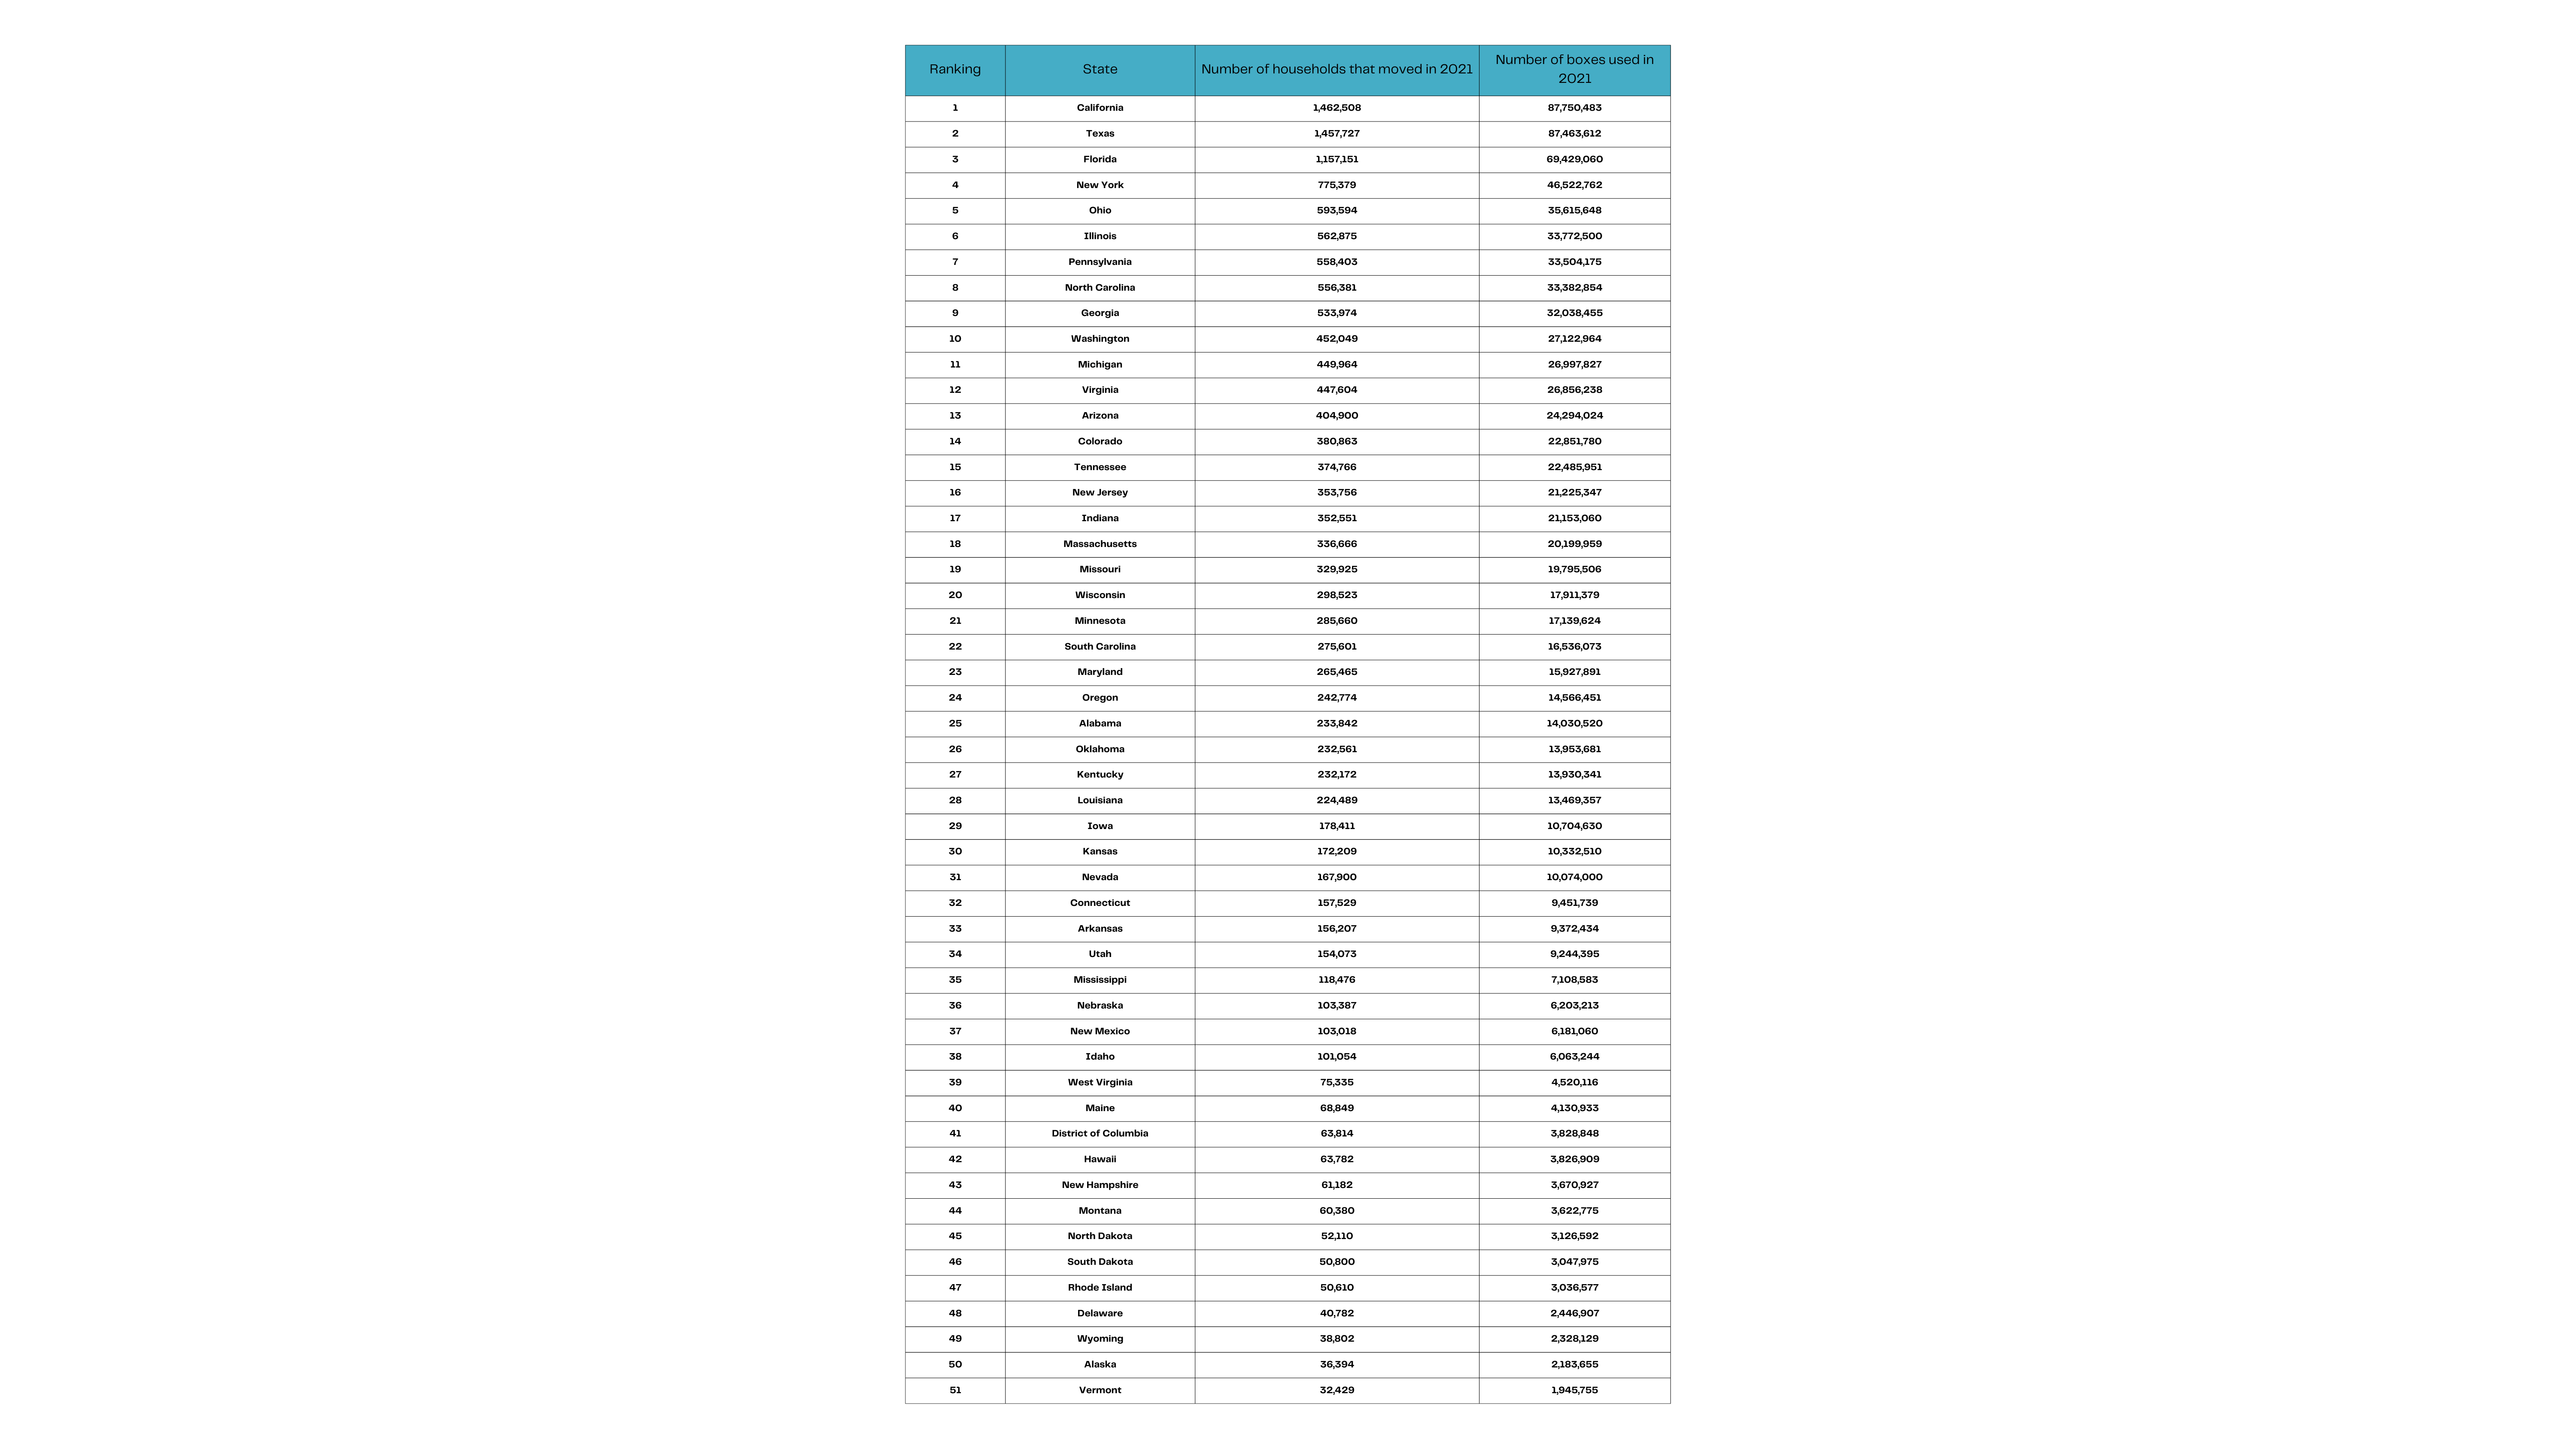 A table showing how many boxes each state uses per year when moving.